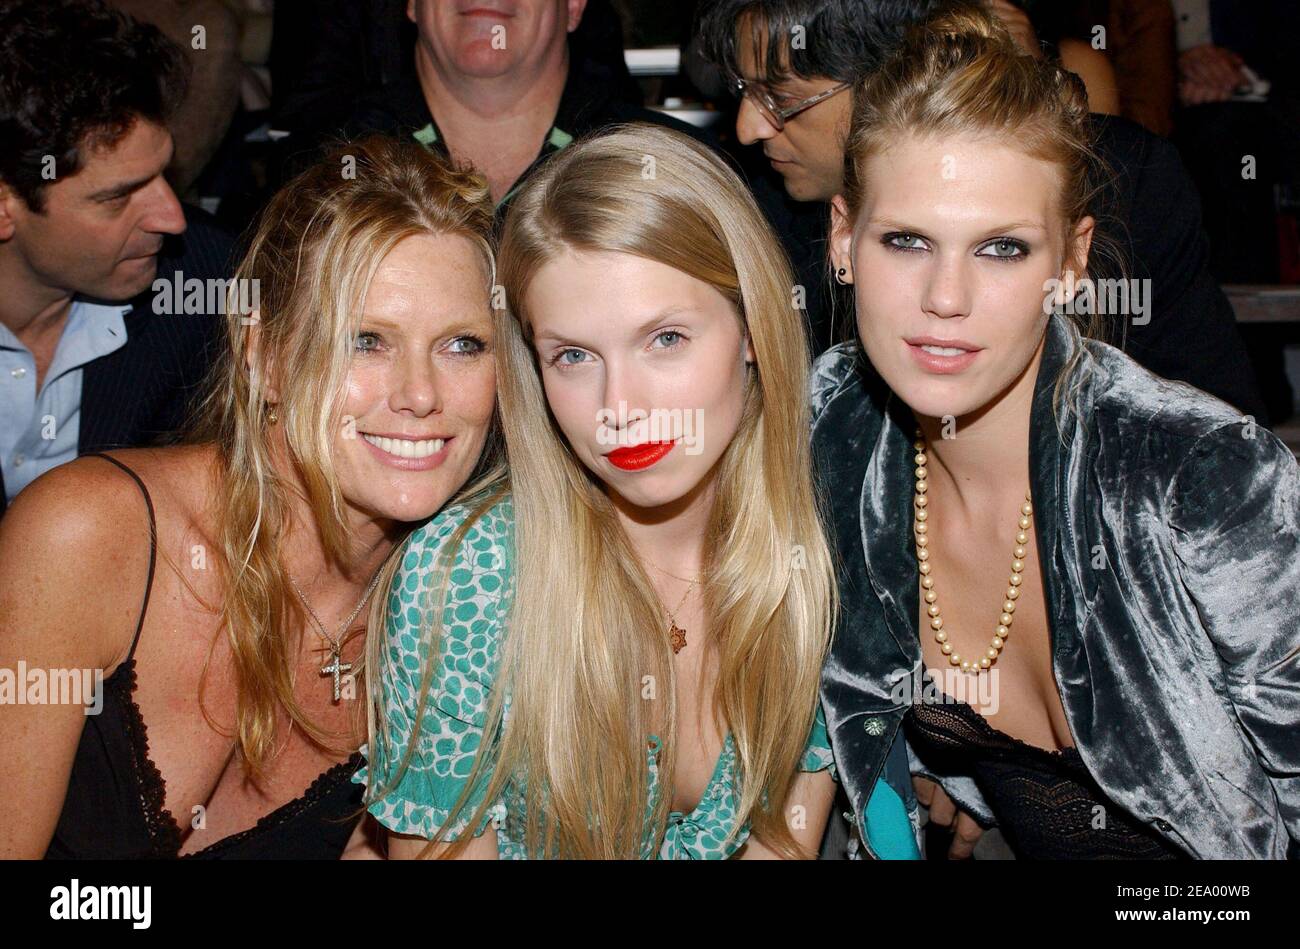 Mum Patty Hansen and daughters Theodora and Alexandra Richards attend the Marc Jacobs runway presentation, as part of the Fall winter 2005 Fashion Week, held at the Armory in New York, on Monday February 7, 2005. Photo by Nicolas Khayat/ABACA. Stock Photo